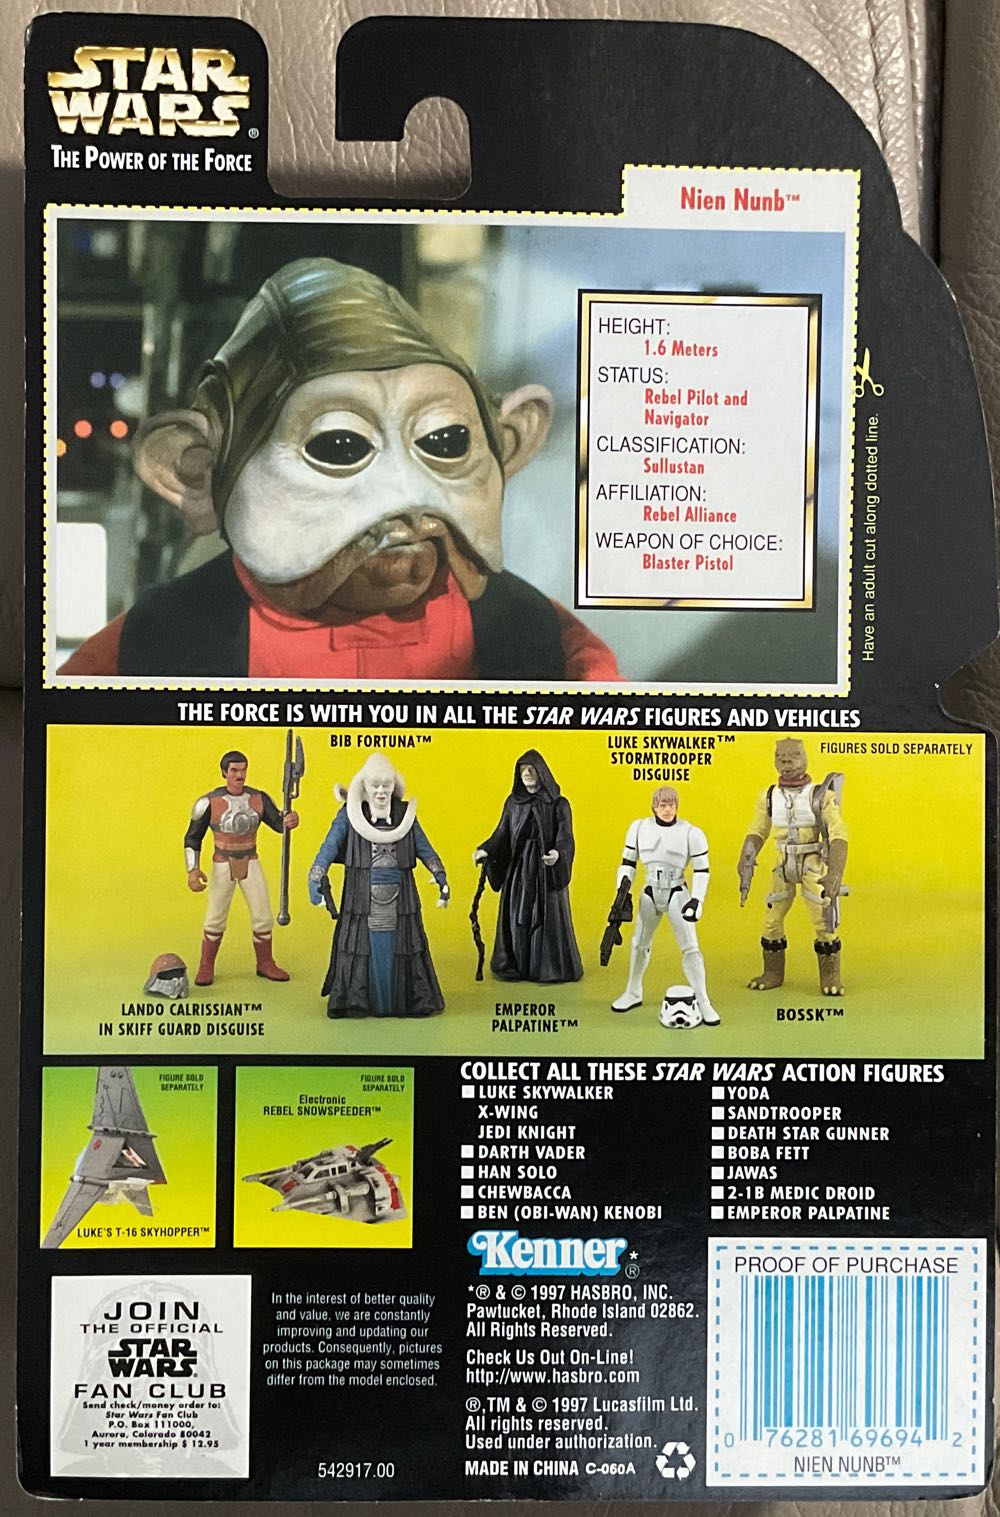 Power Of The Force (GC) - Nien Nunb - Hasbro (Return Of The Jedi) action figure collectible - Main Image 2